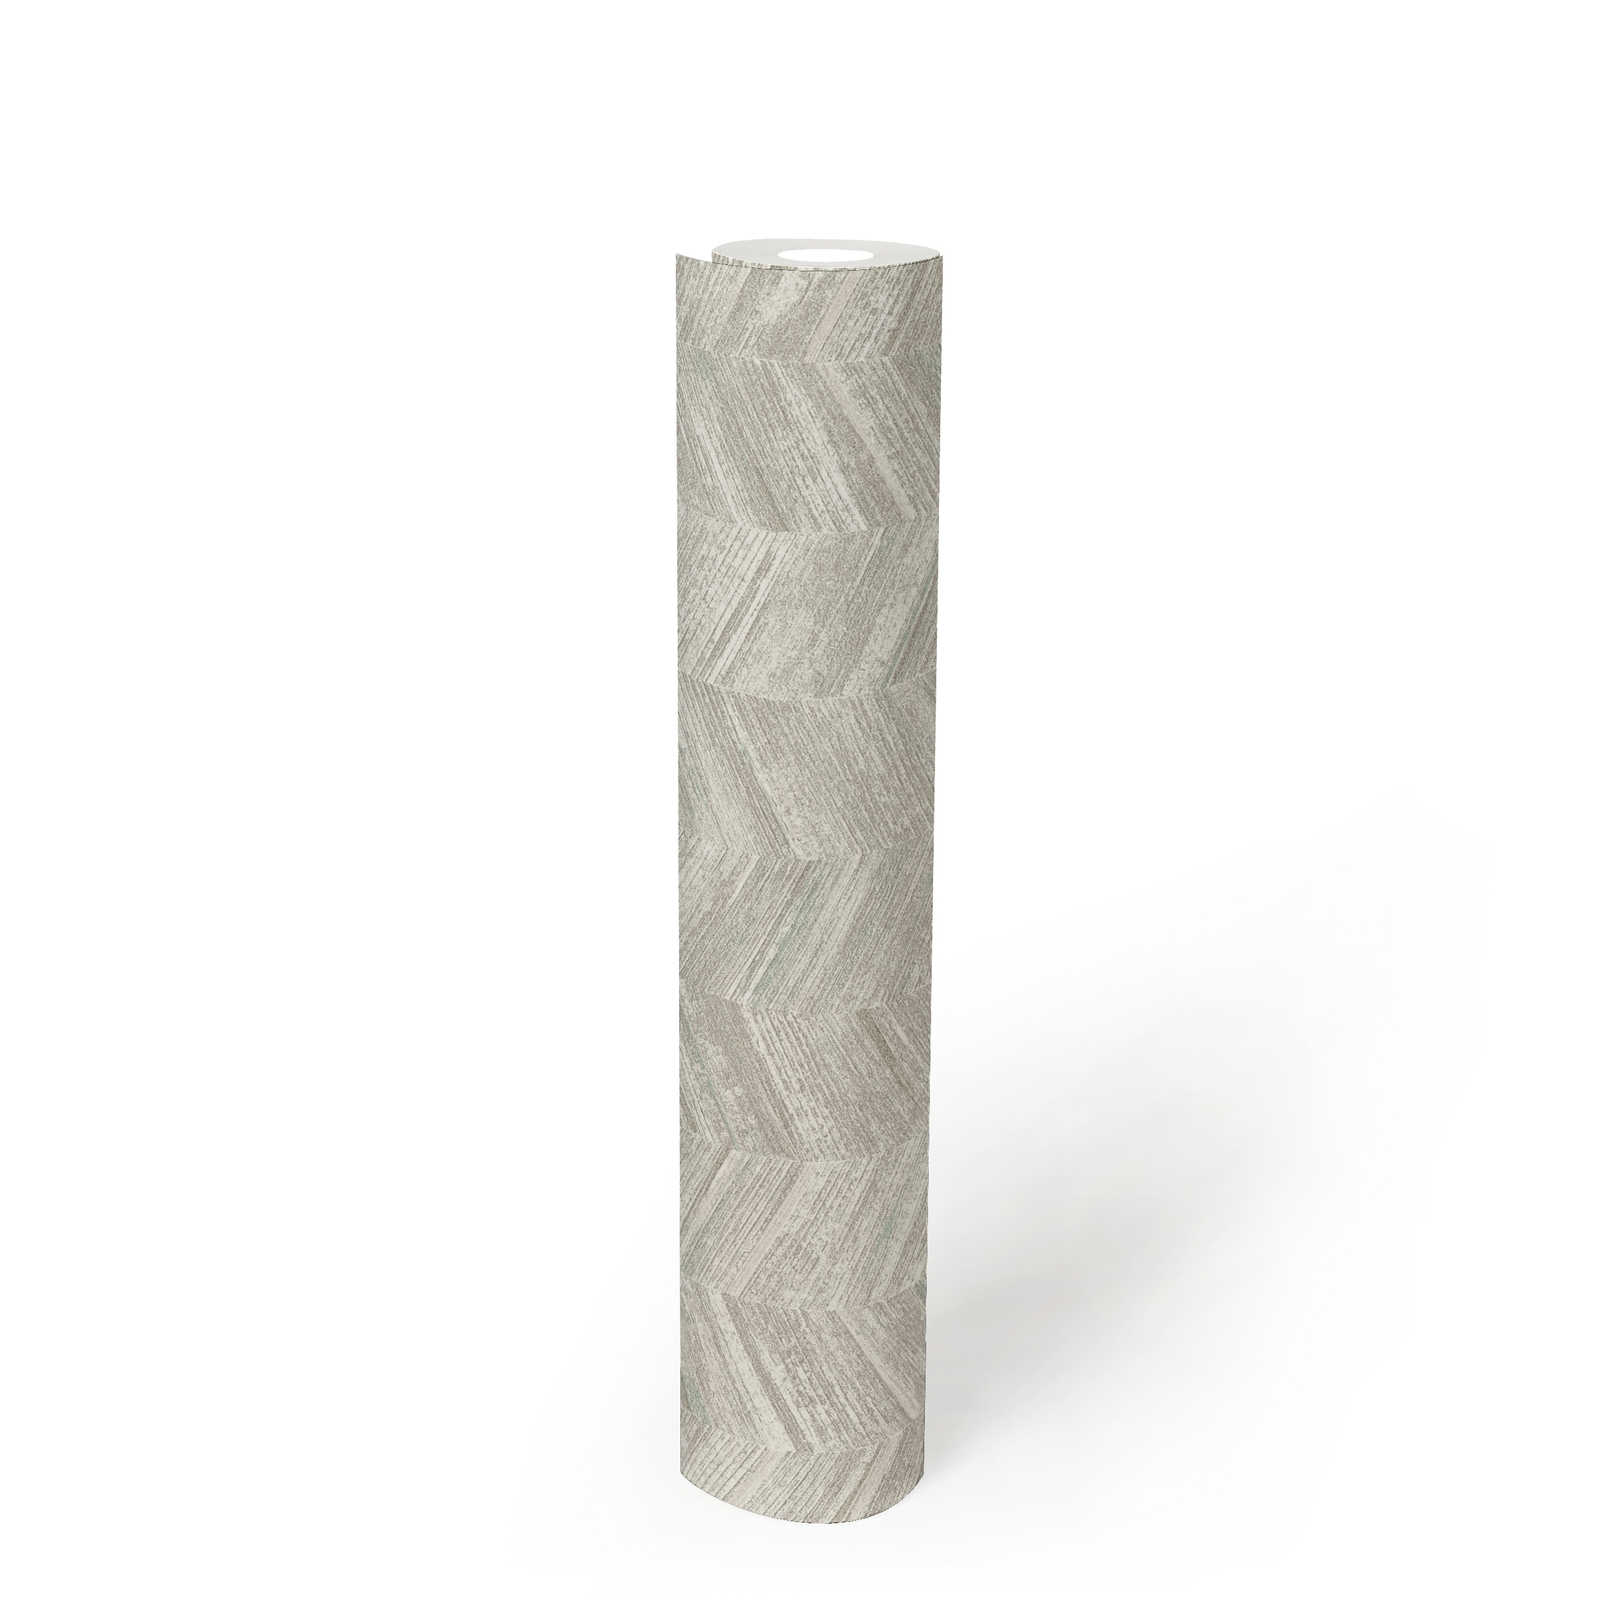             Textured wallpaper non-woven with wood effect & herringbone pattern - grey, white
        